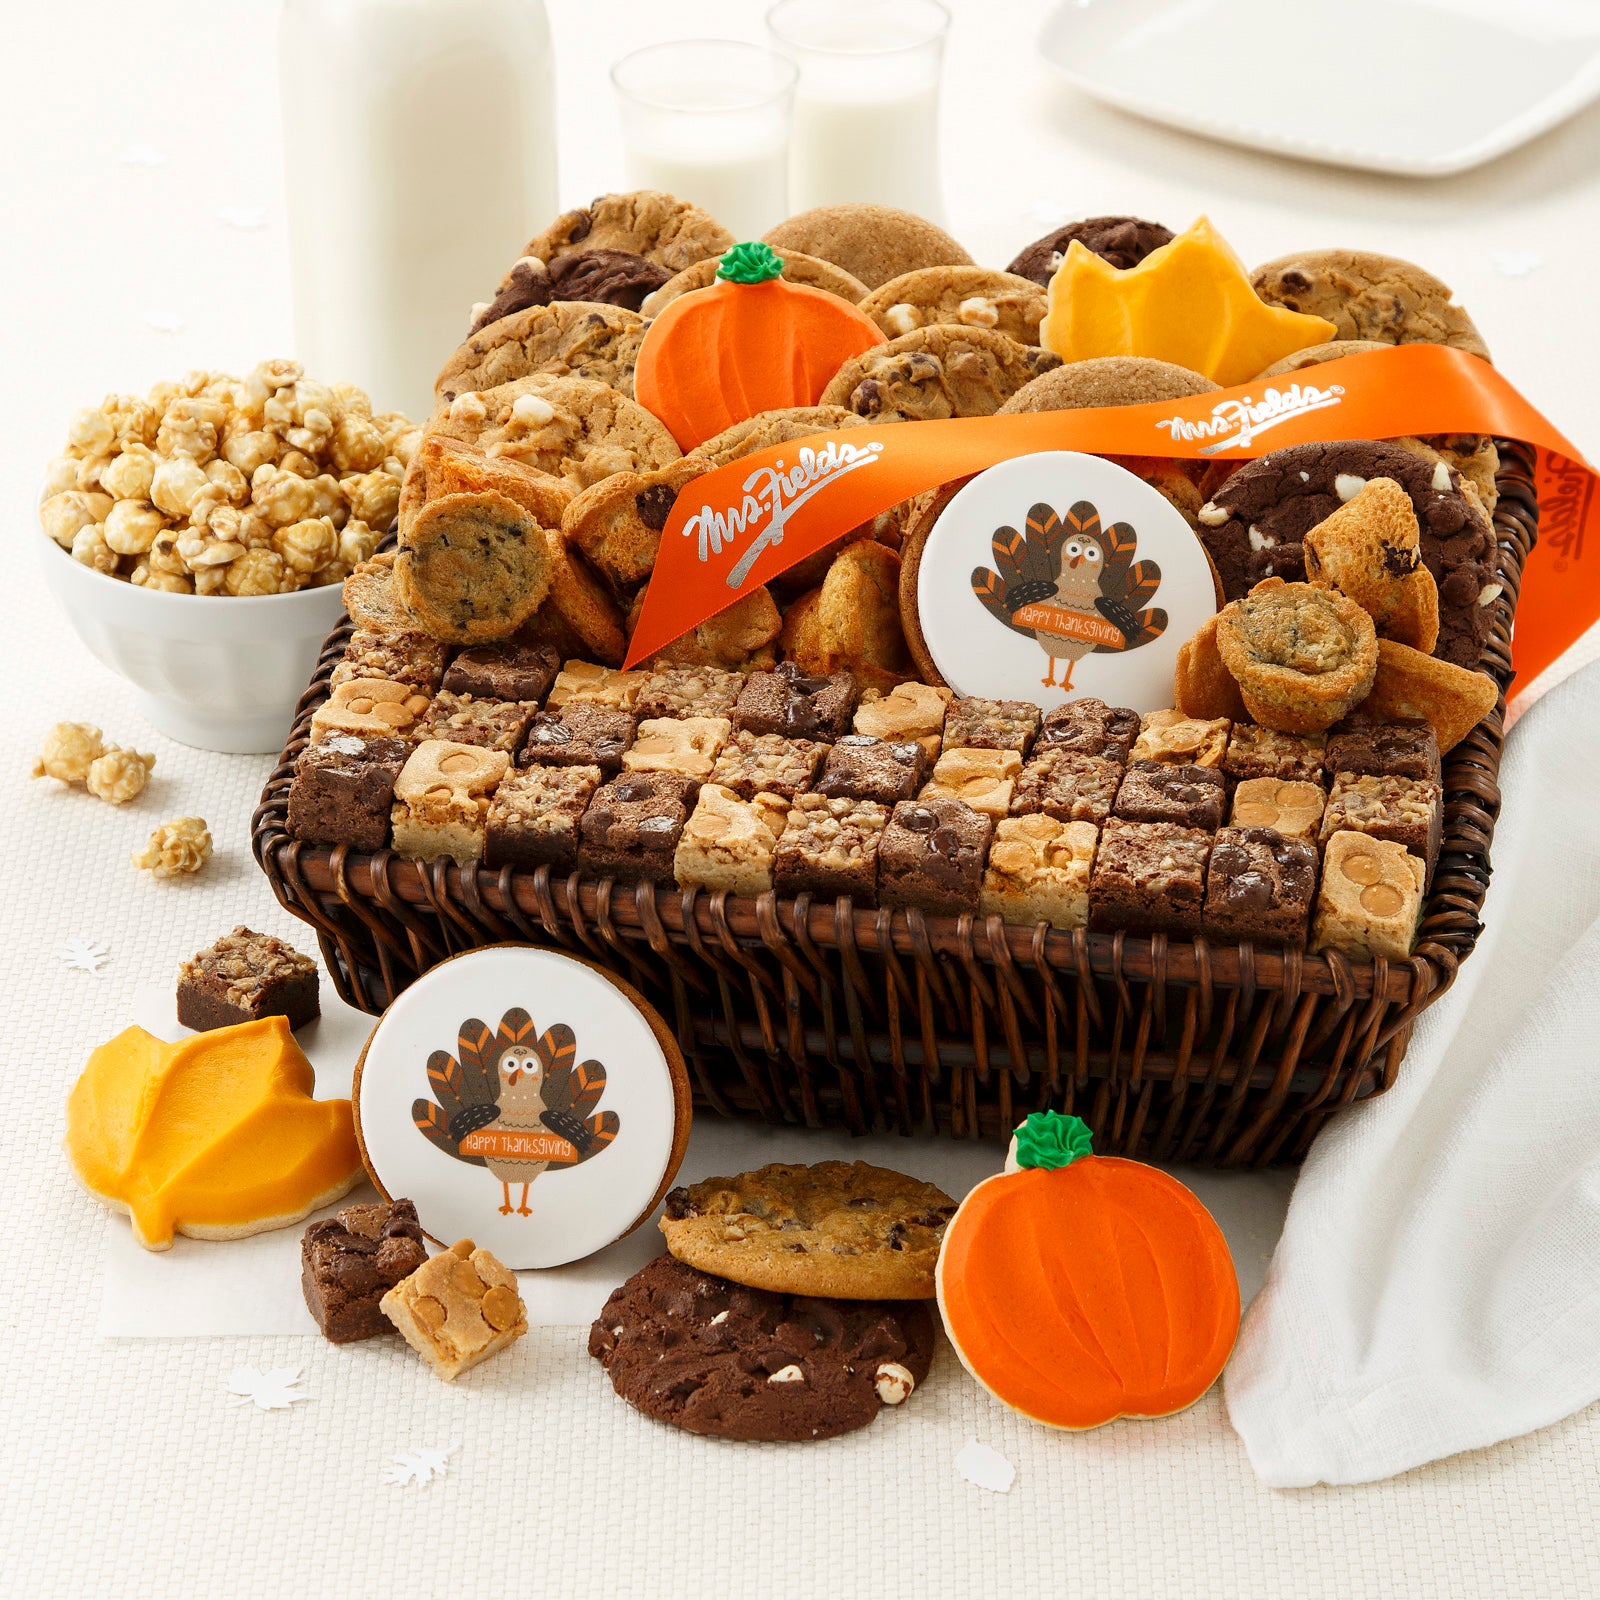 A large brown basket filled with an assortment of original cookies, brownie bites, muffins, frosted cookies, and a logo cookie. Outside of the basket is a bowl of popcorn with an assortment of frosted cookies, brownie bites and original cookies